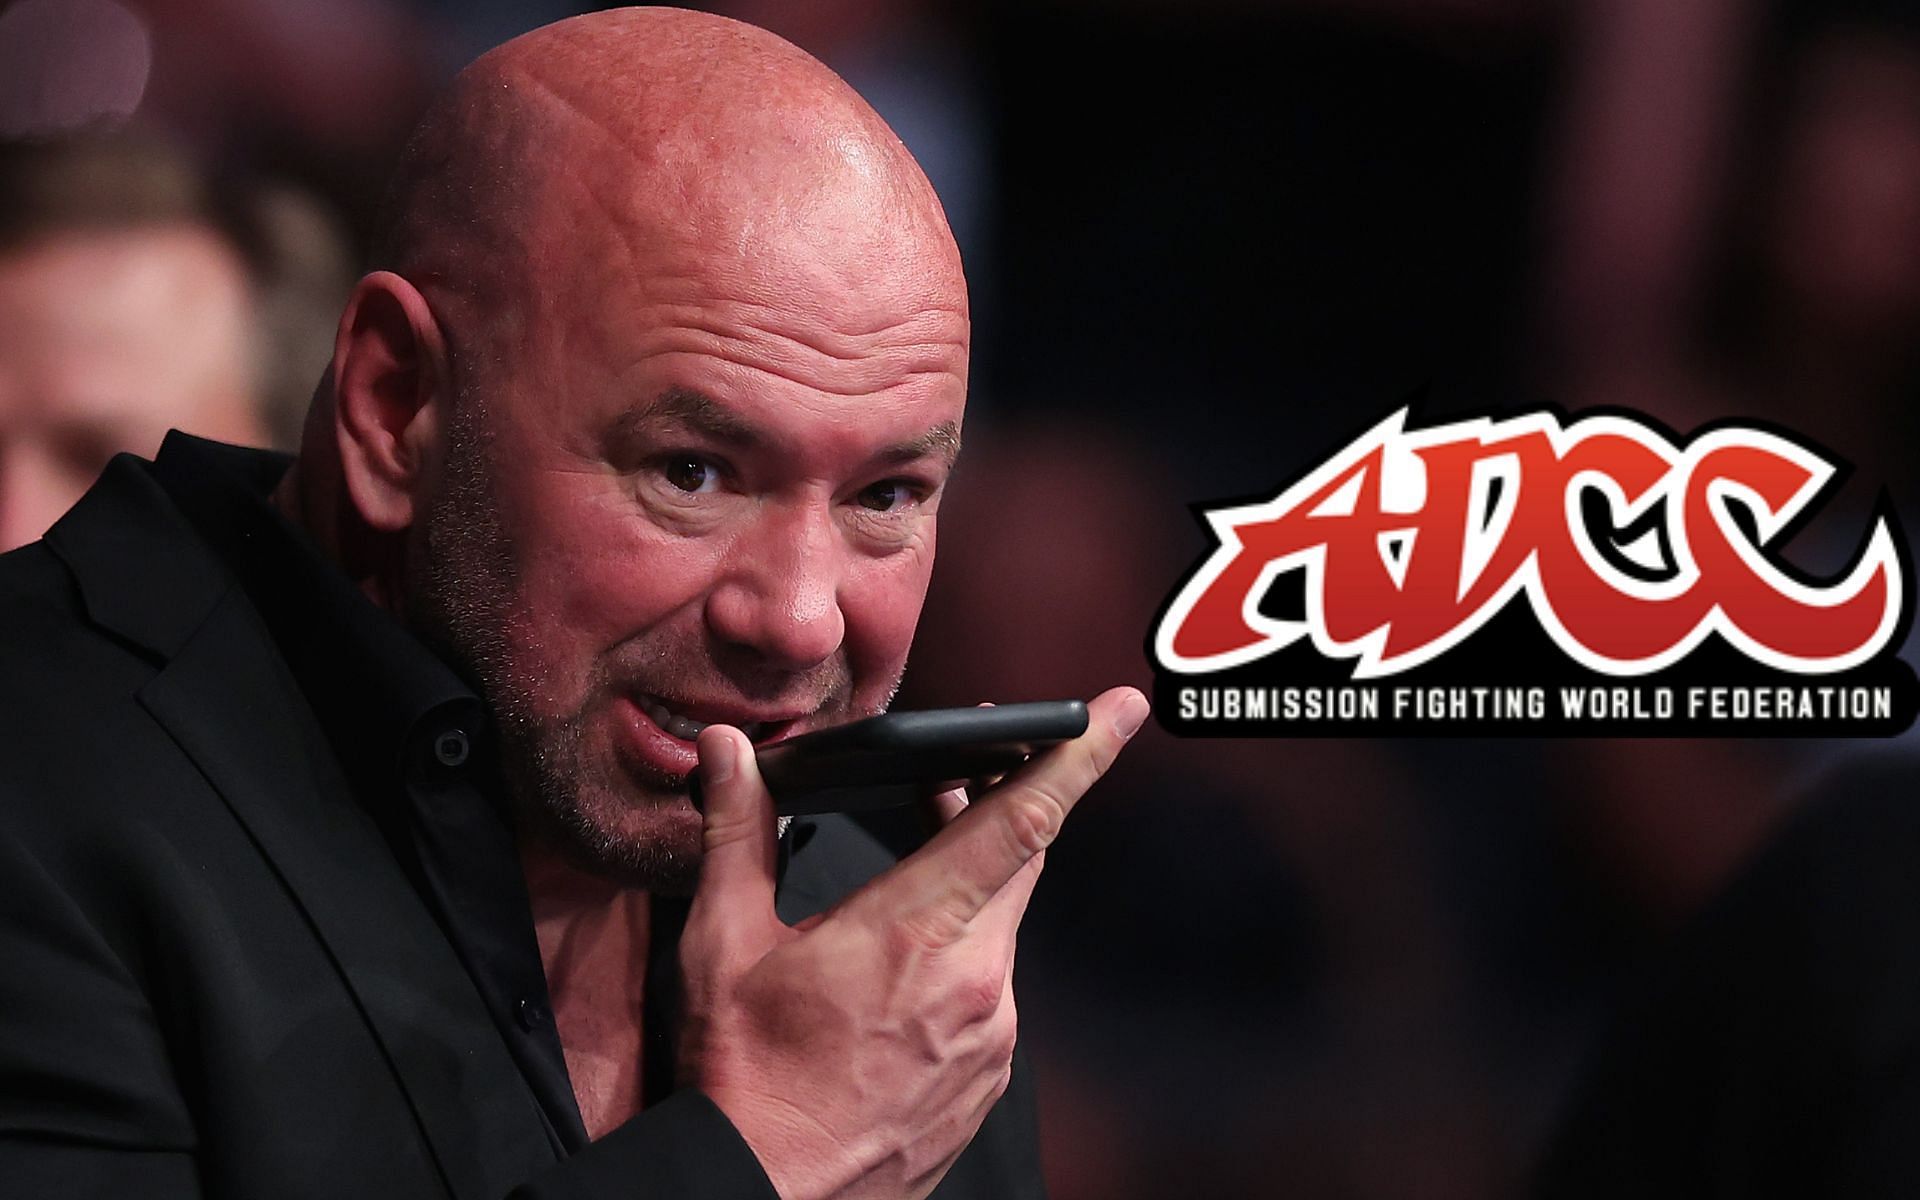 Dana White (left) and ADCC logo (right). [Images courtesy: left from Getty Images and right from ADCC]